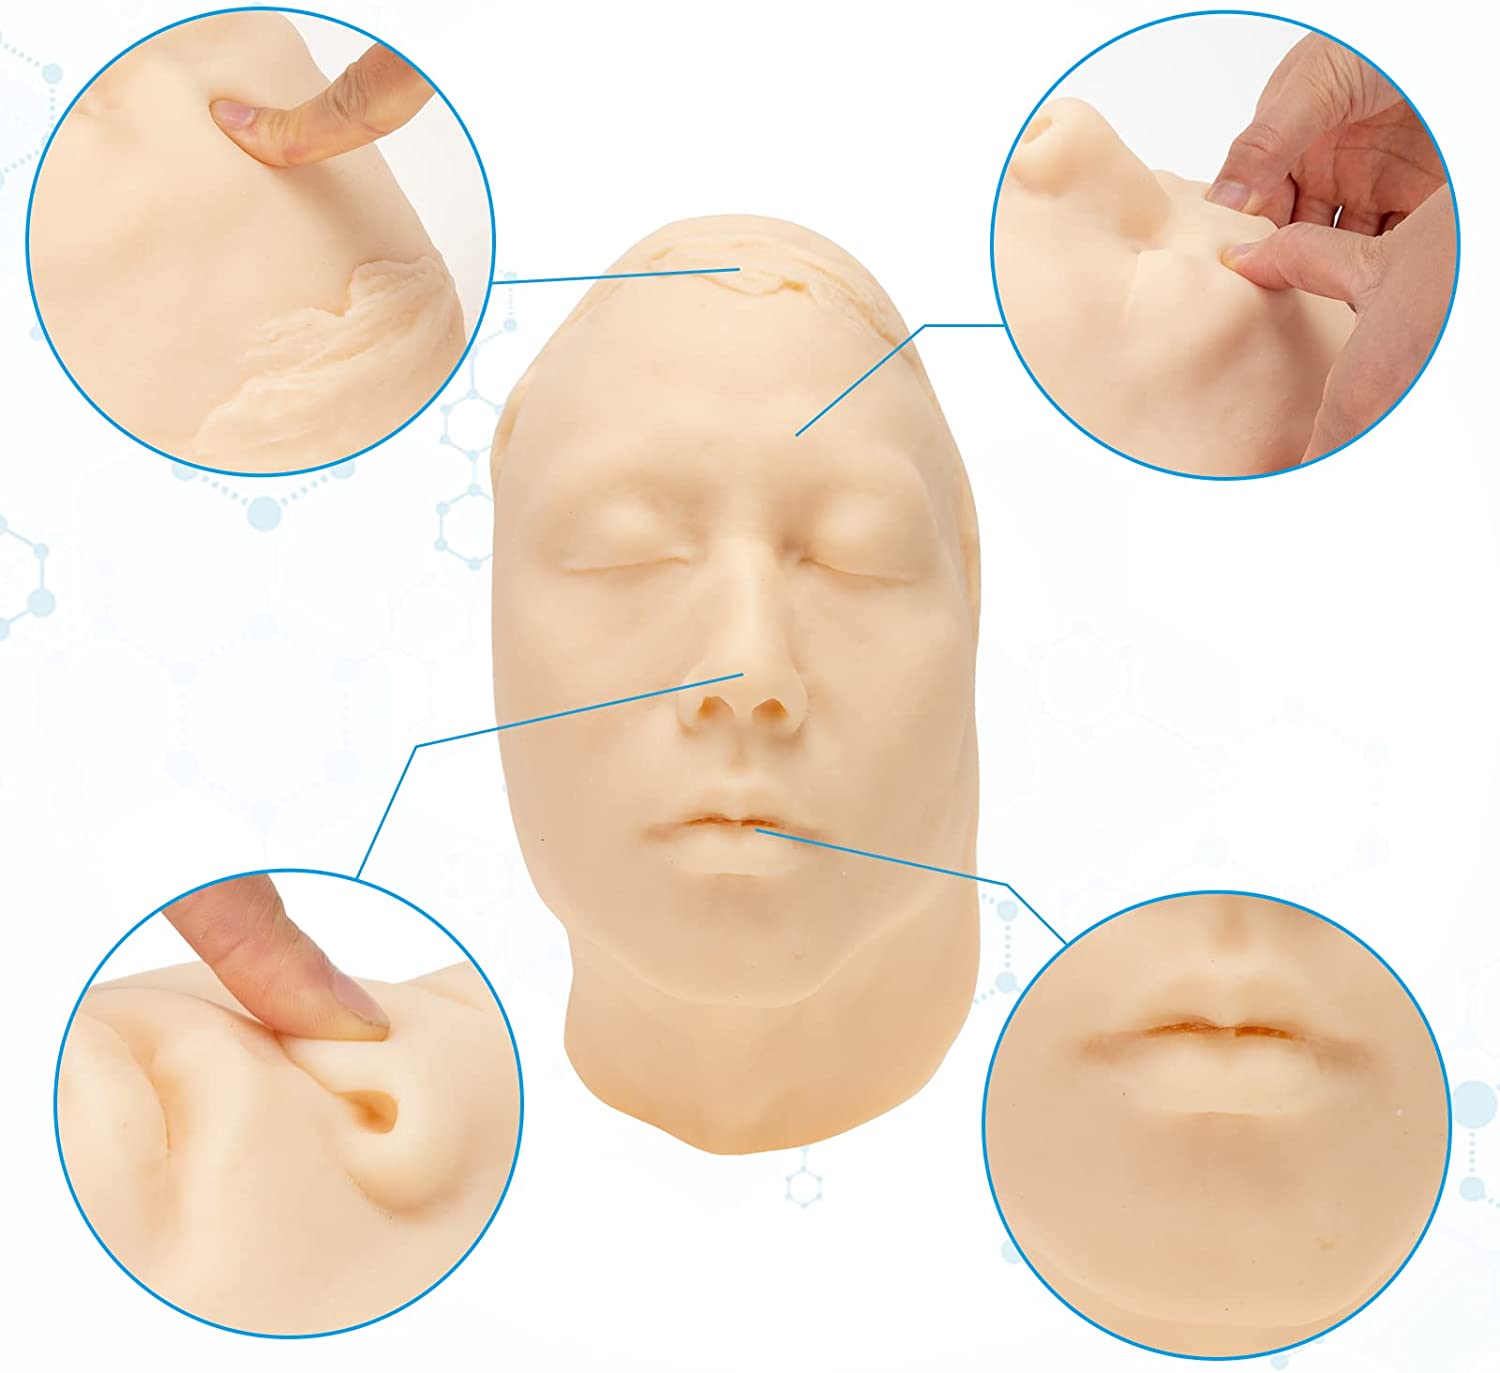 RONTEN Injection Training Silicone Human Face Model Life-Size Head And Face Injection Model With Bones Inside